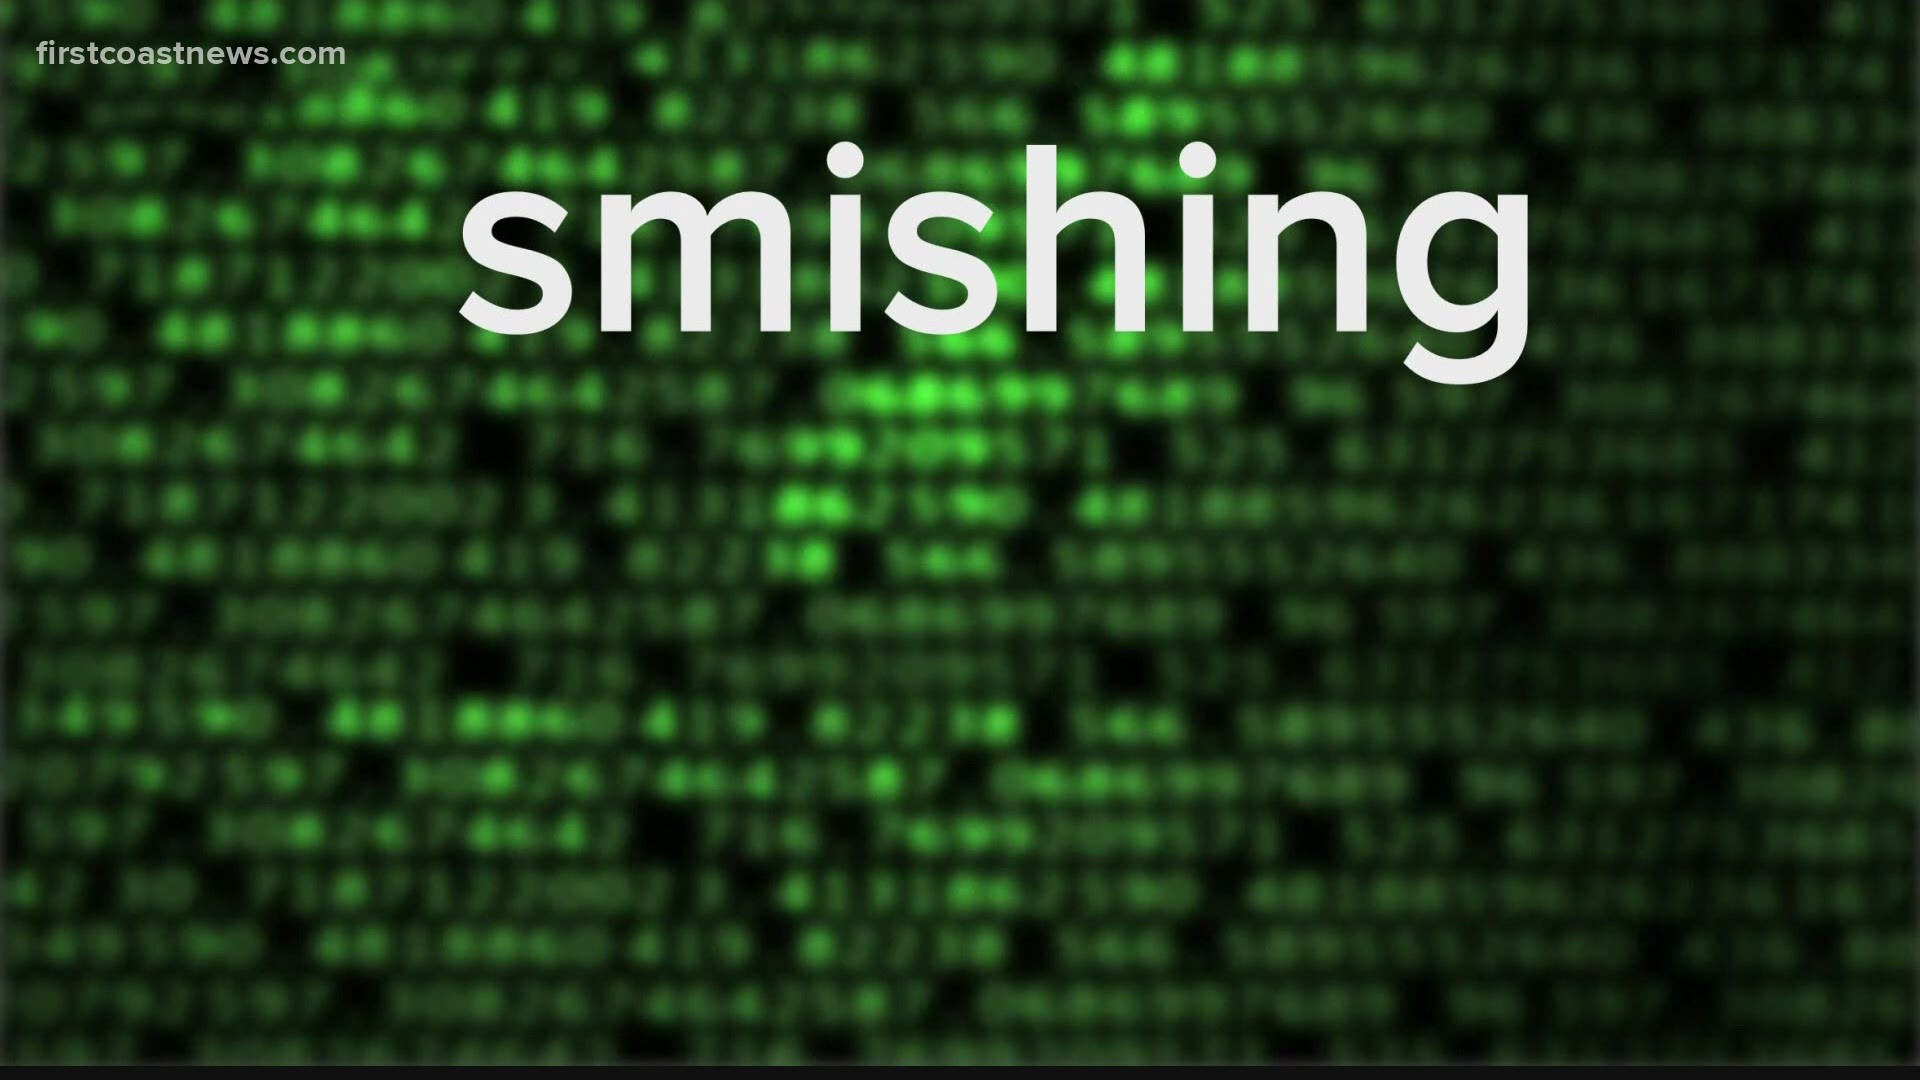 Smishing was one of the top reported scam crimes of 2020. Scammers contact victims through their phones trying to get personal information.